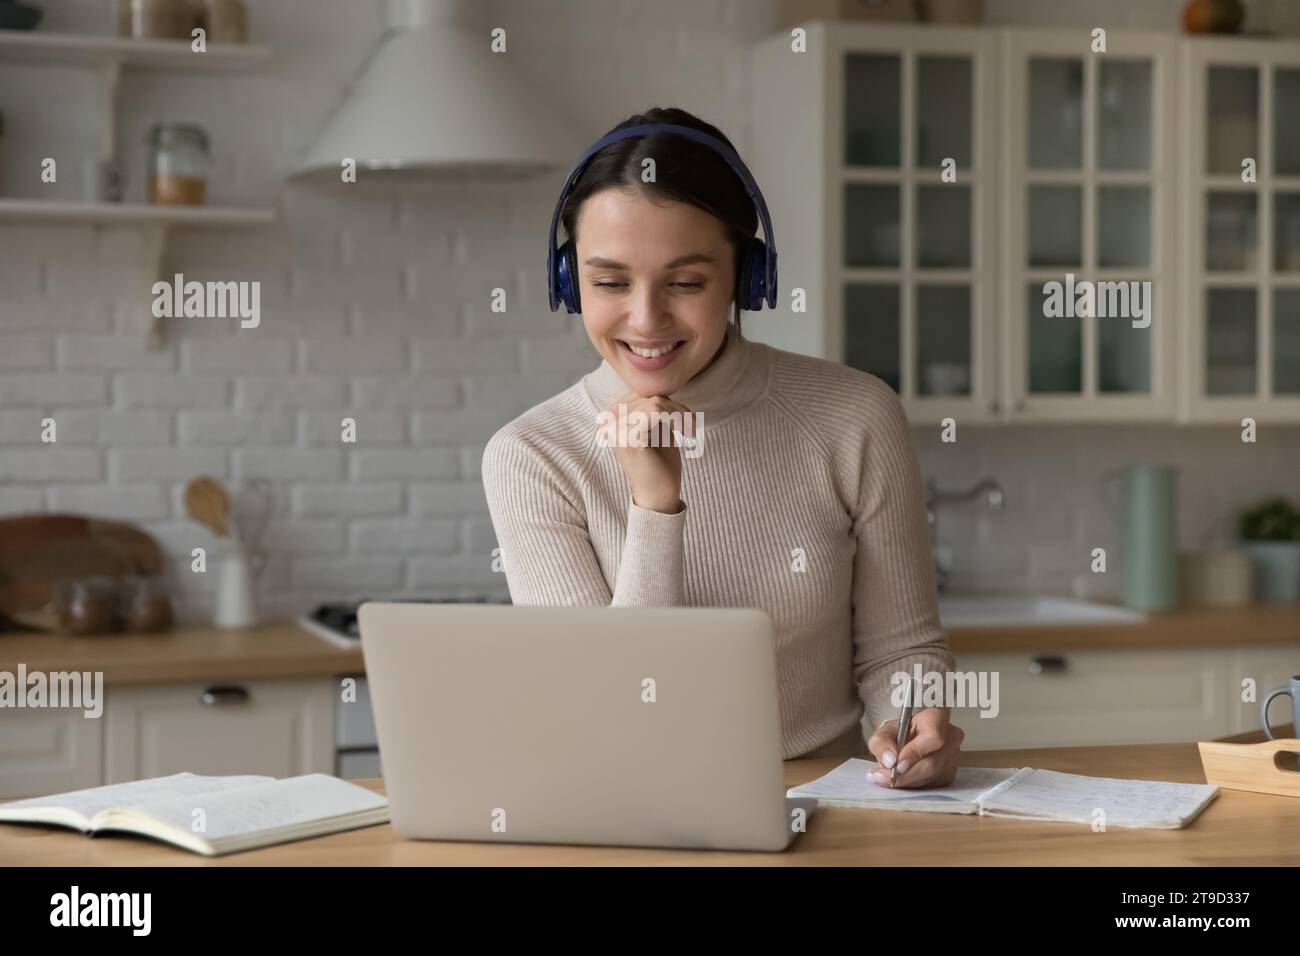 Student woman in headphones studying at home using laptop Stock Photo